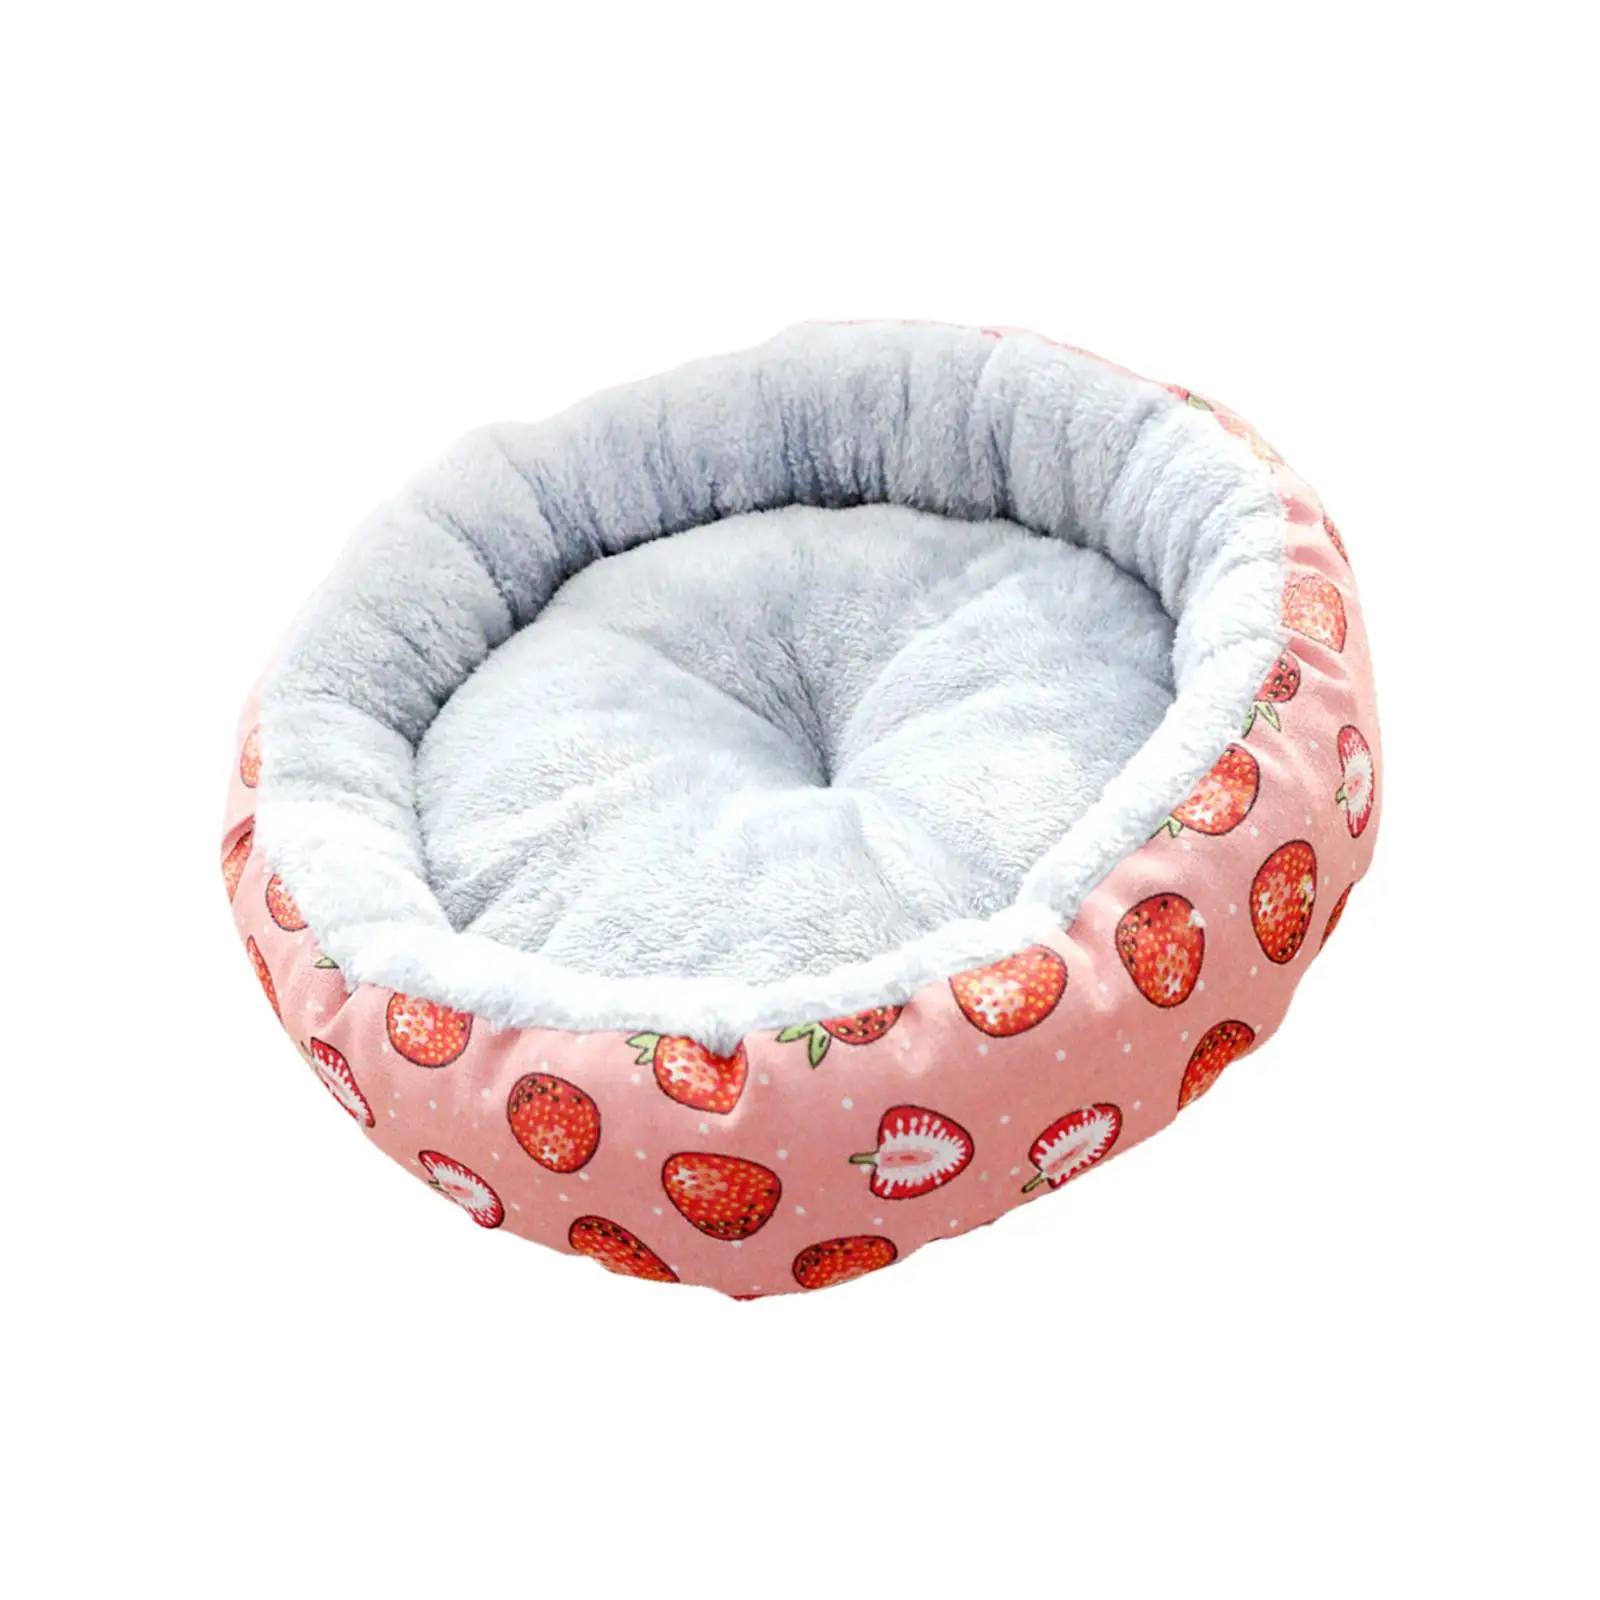 cat Dog Bed 45cm Comfortable Indoor Autumn Winter Round for Small Pets